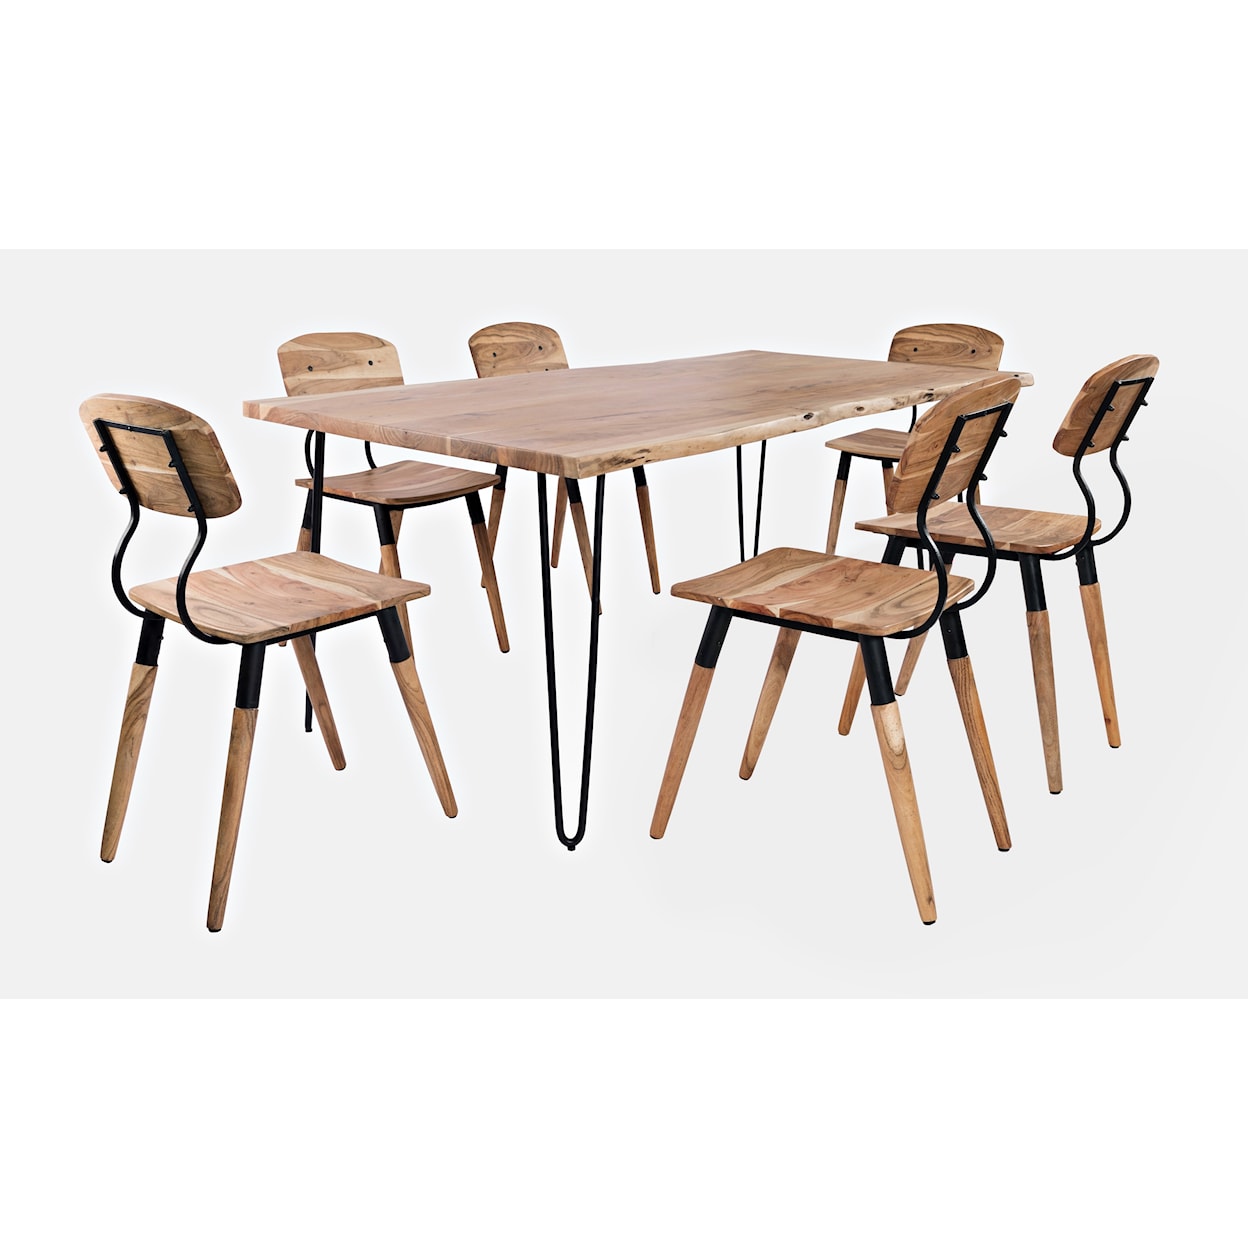 VFM Signature Nature's Edge 79" Dining Table with 6 Chairs